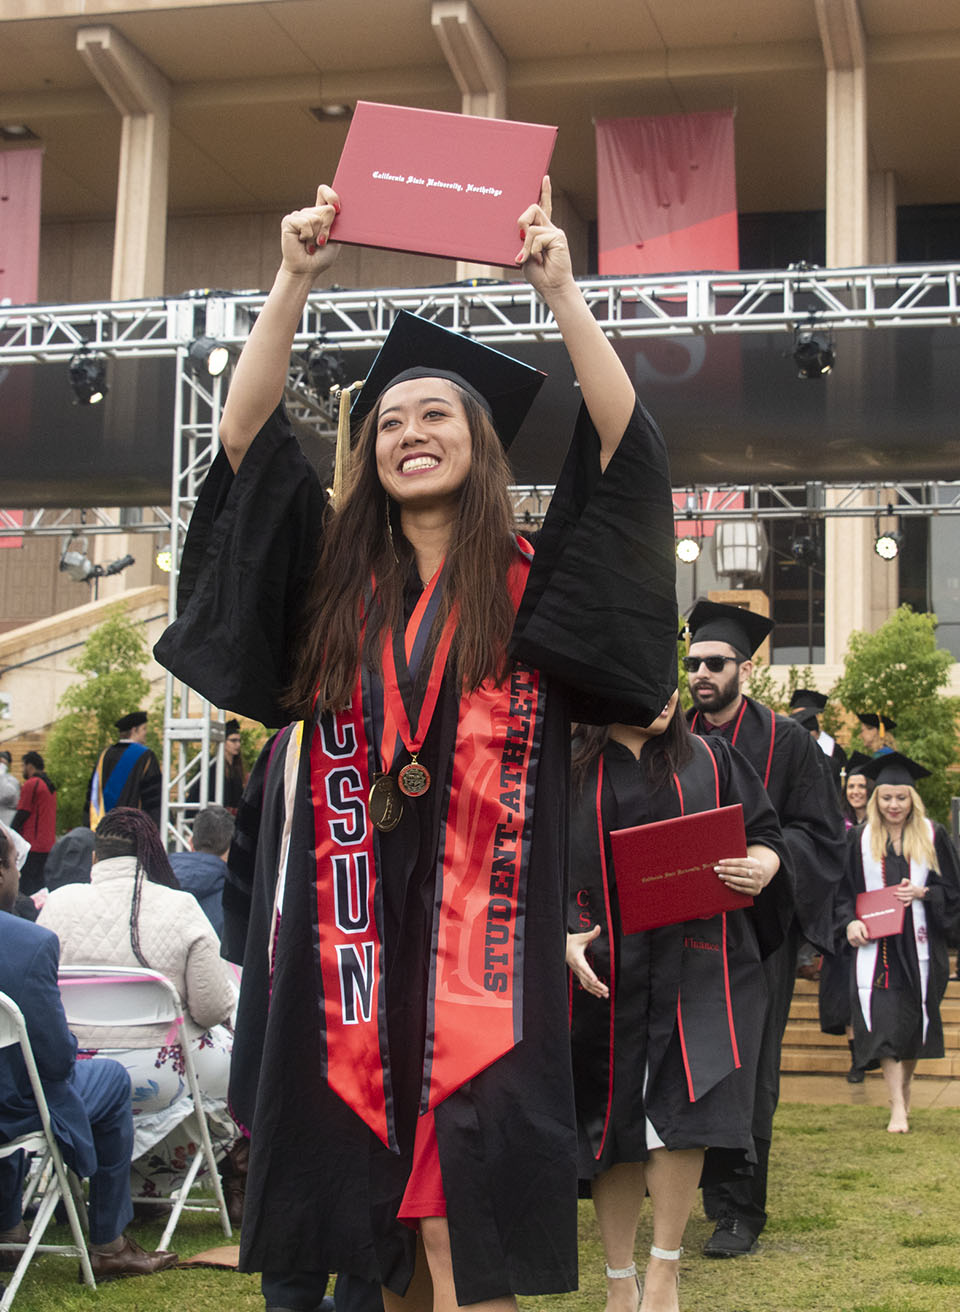 Smiling college graduate is wearing a red stole that says 'CSUN student athlete' and is holding up a red diploma.